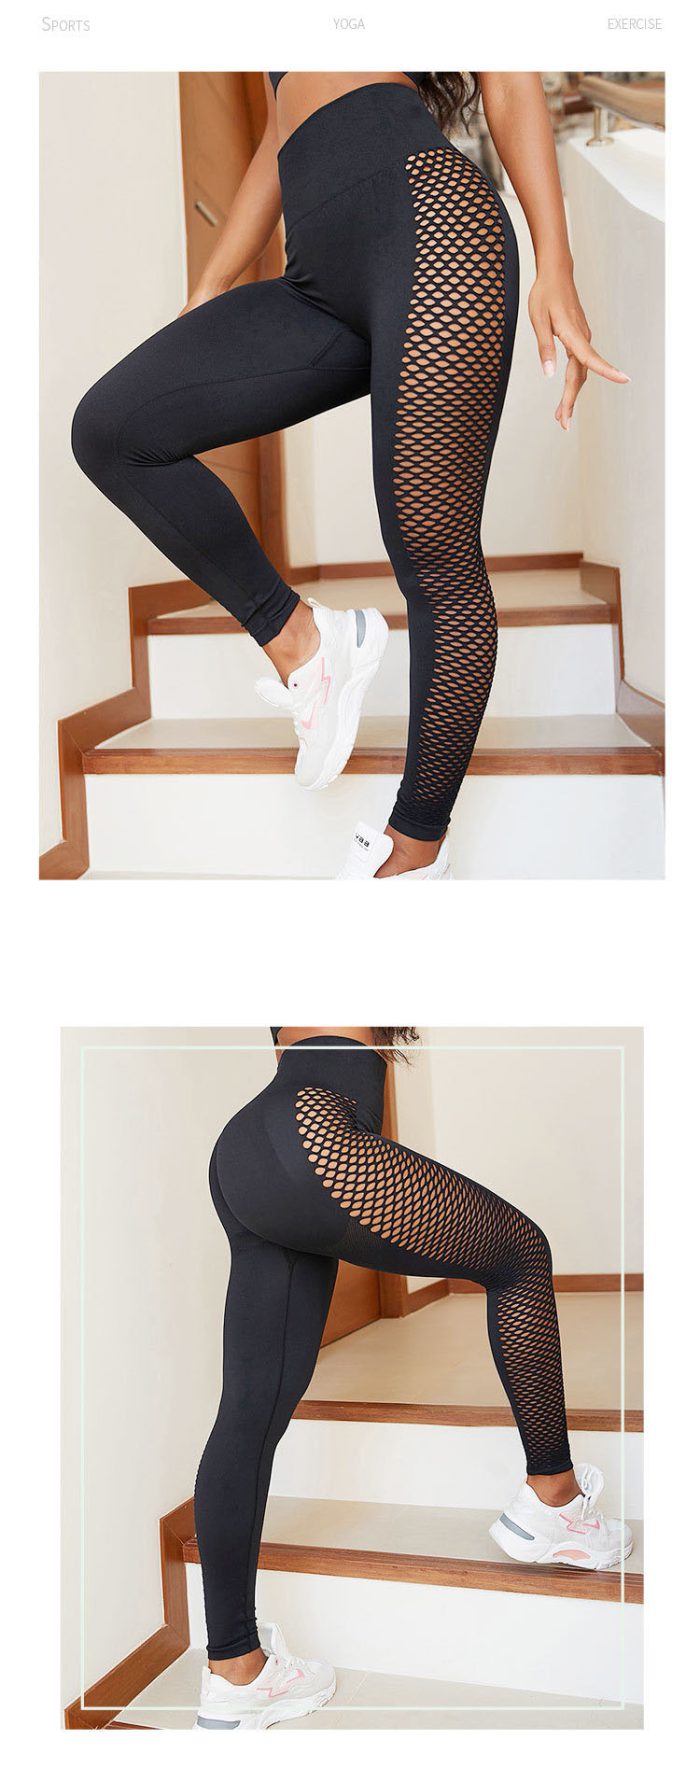 Sexy Leggings Yoga Pants Gym High Waist Push Up Fitness Female Leggings Solid Color Women Trousers Sports Tights